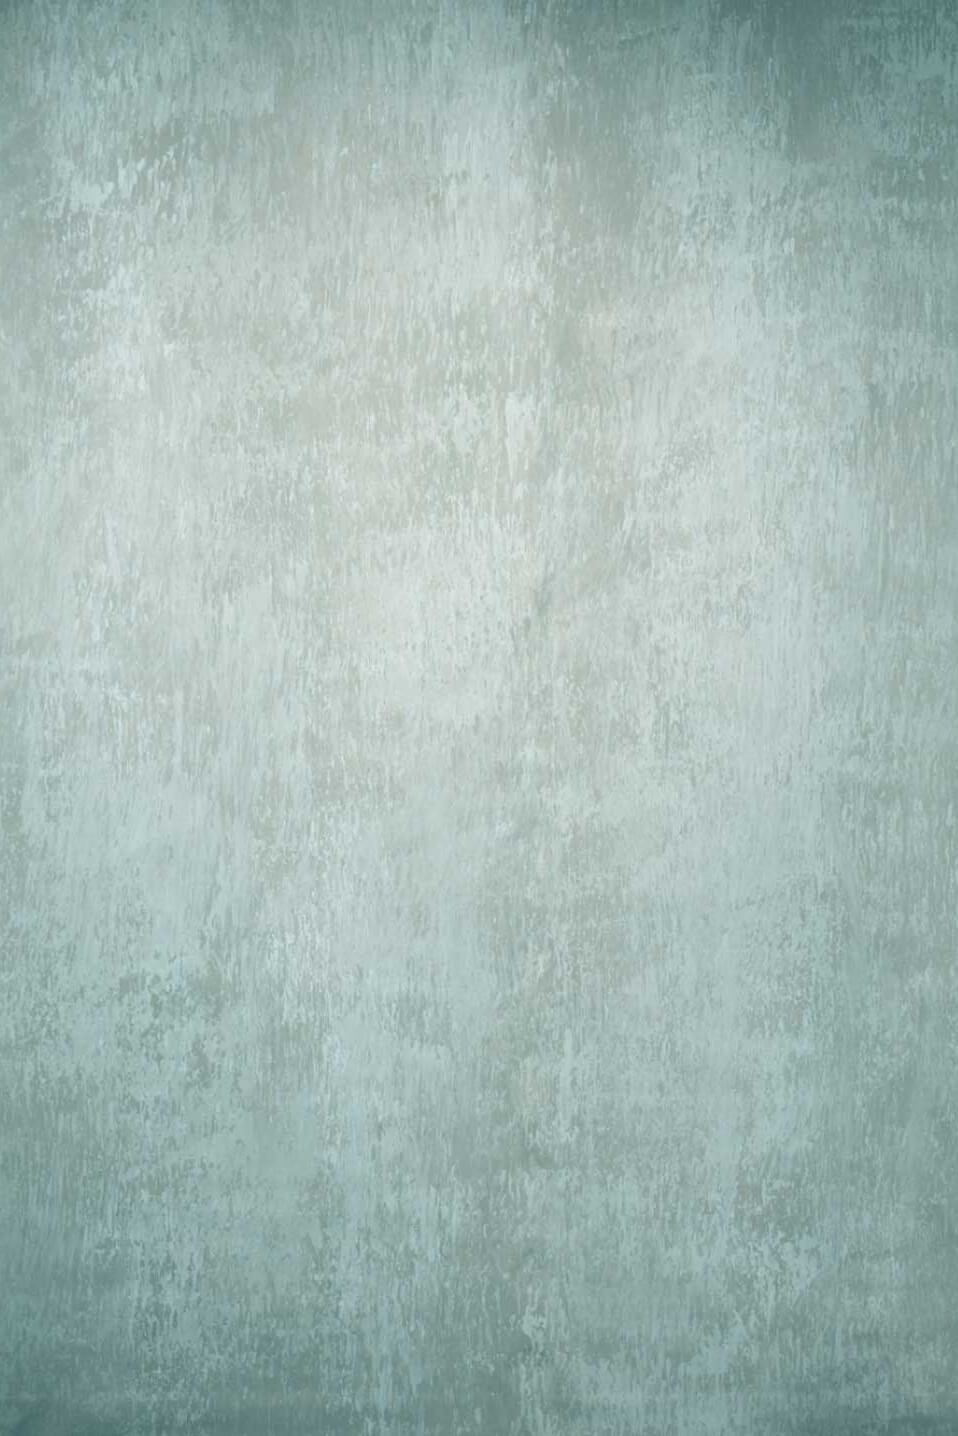 Clotstudio Abstract Beige Green Textured Hand Painted Canvas Backdrop #clot216